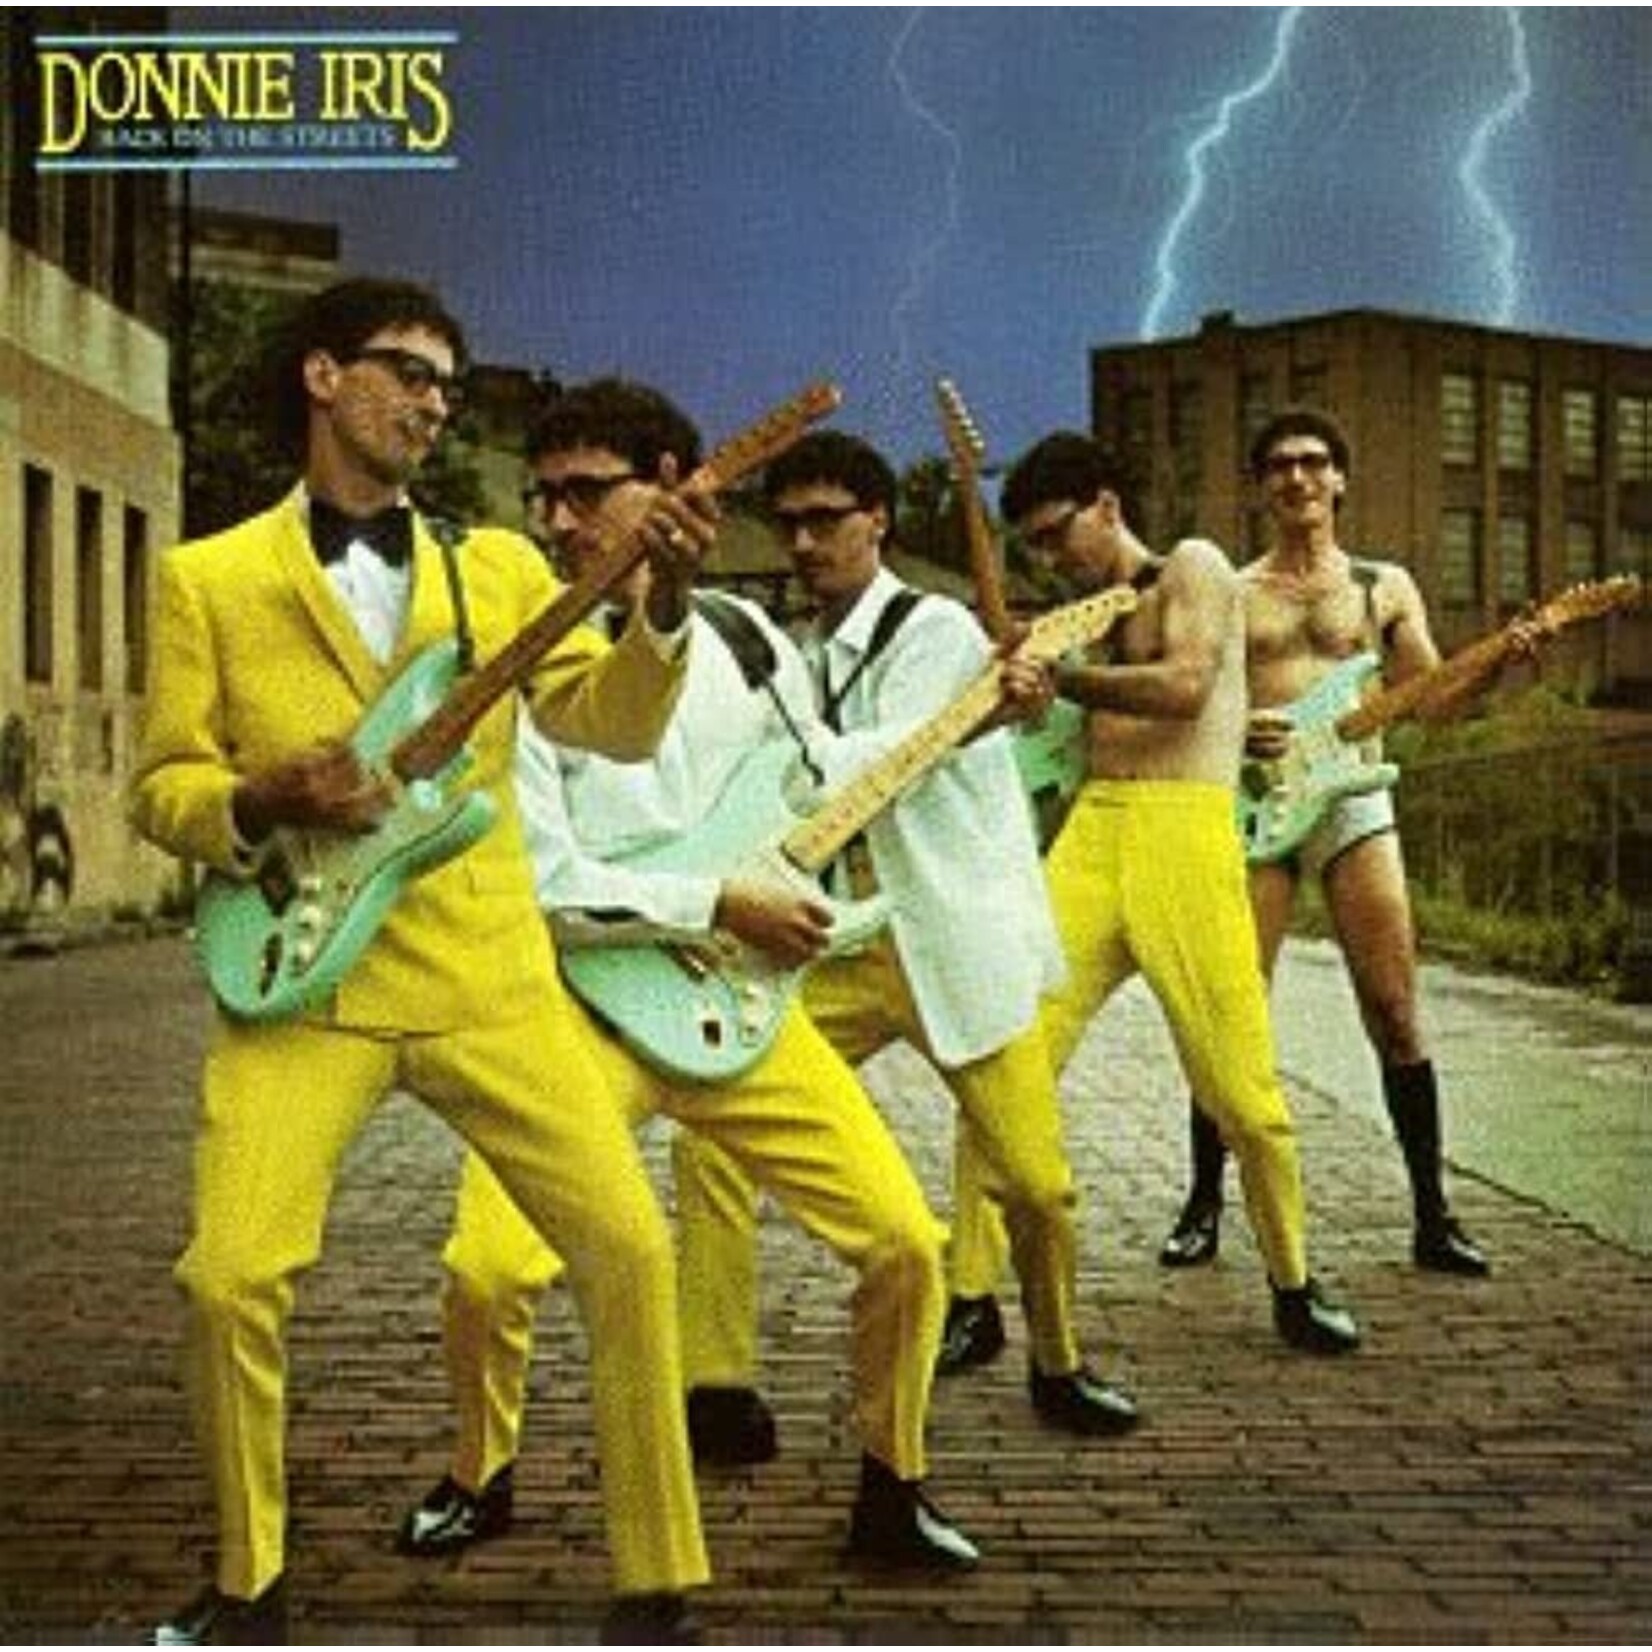 [Vintage] Donnie Iris - Back on the Streets